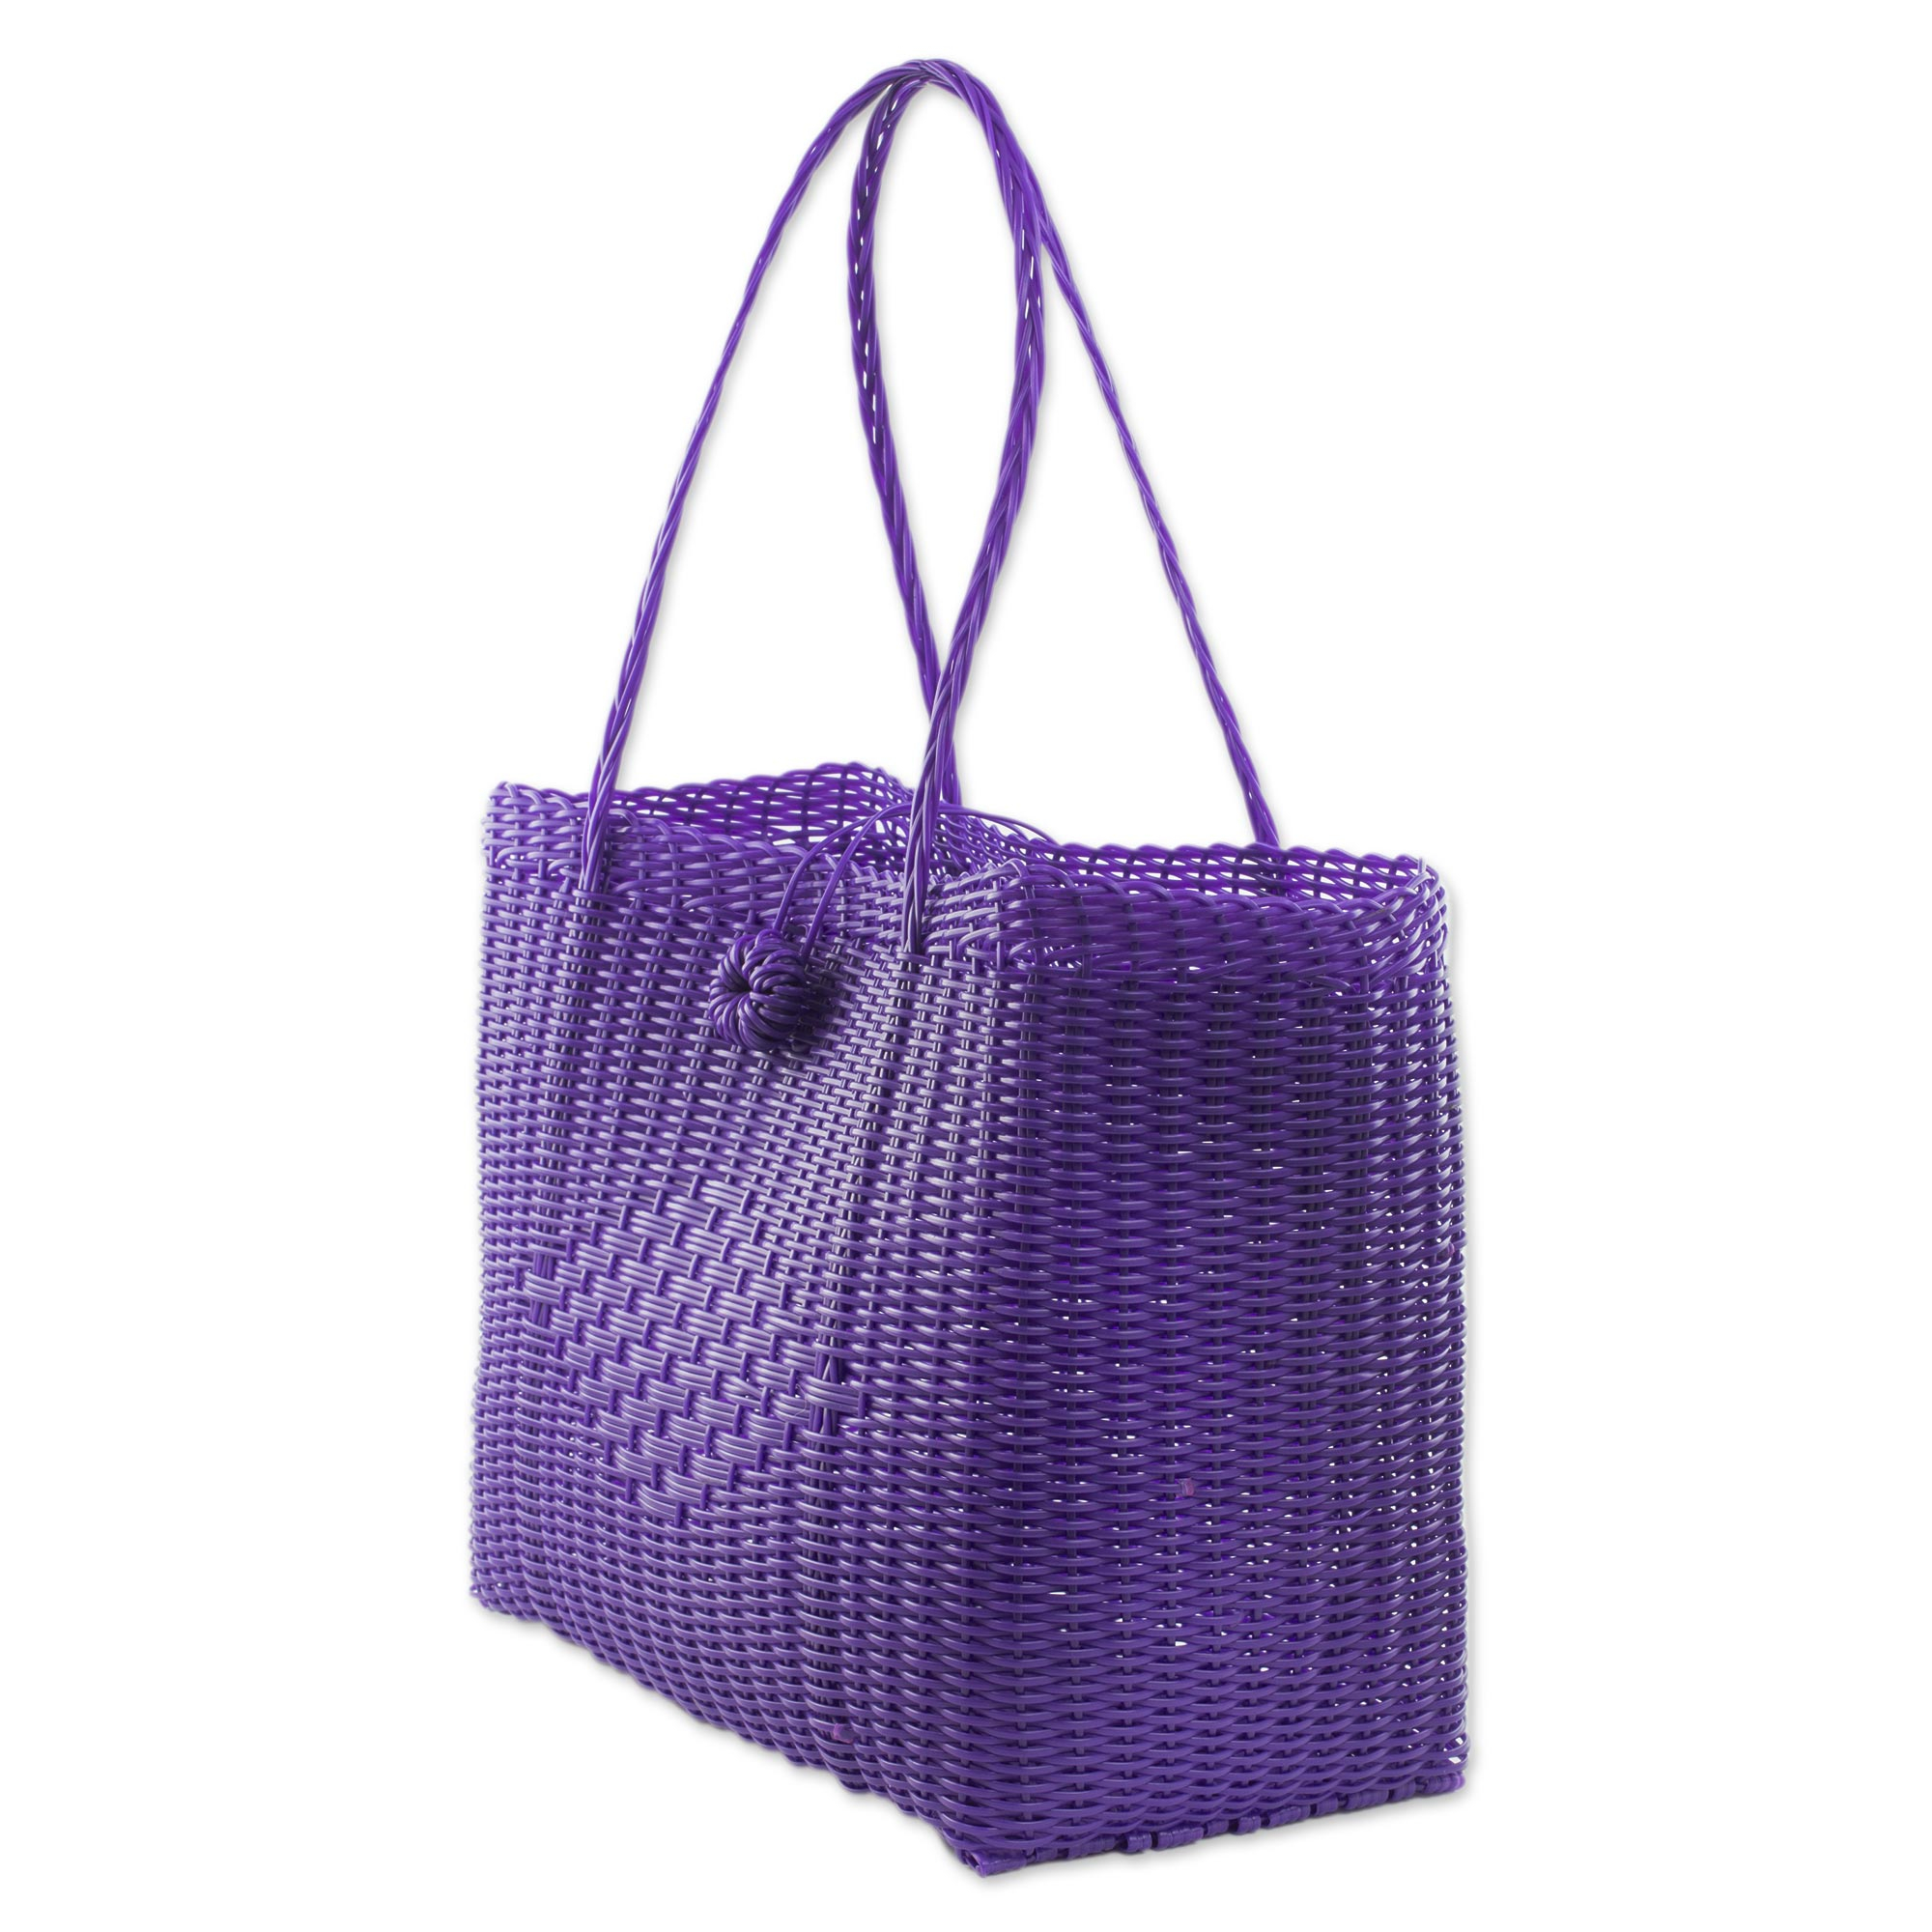 Handwoven Recycled Plastic Tote in Purple from Guatemala - Undeniable ...